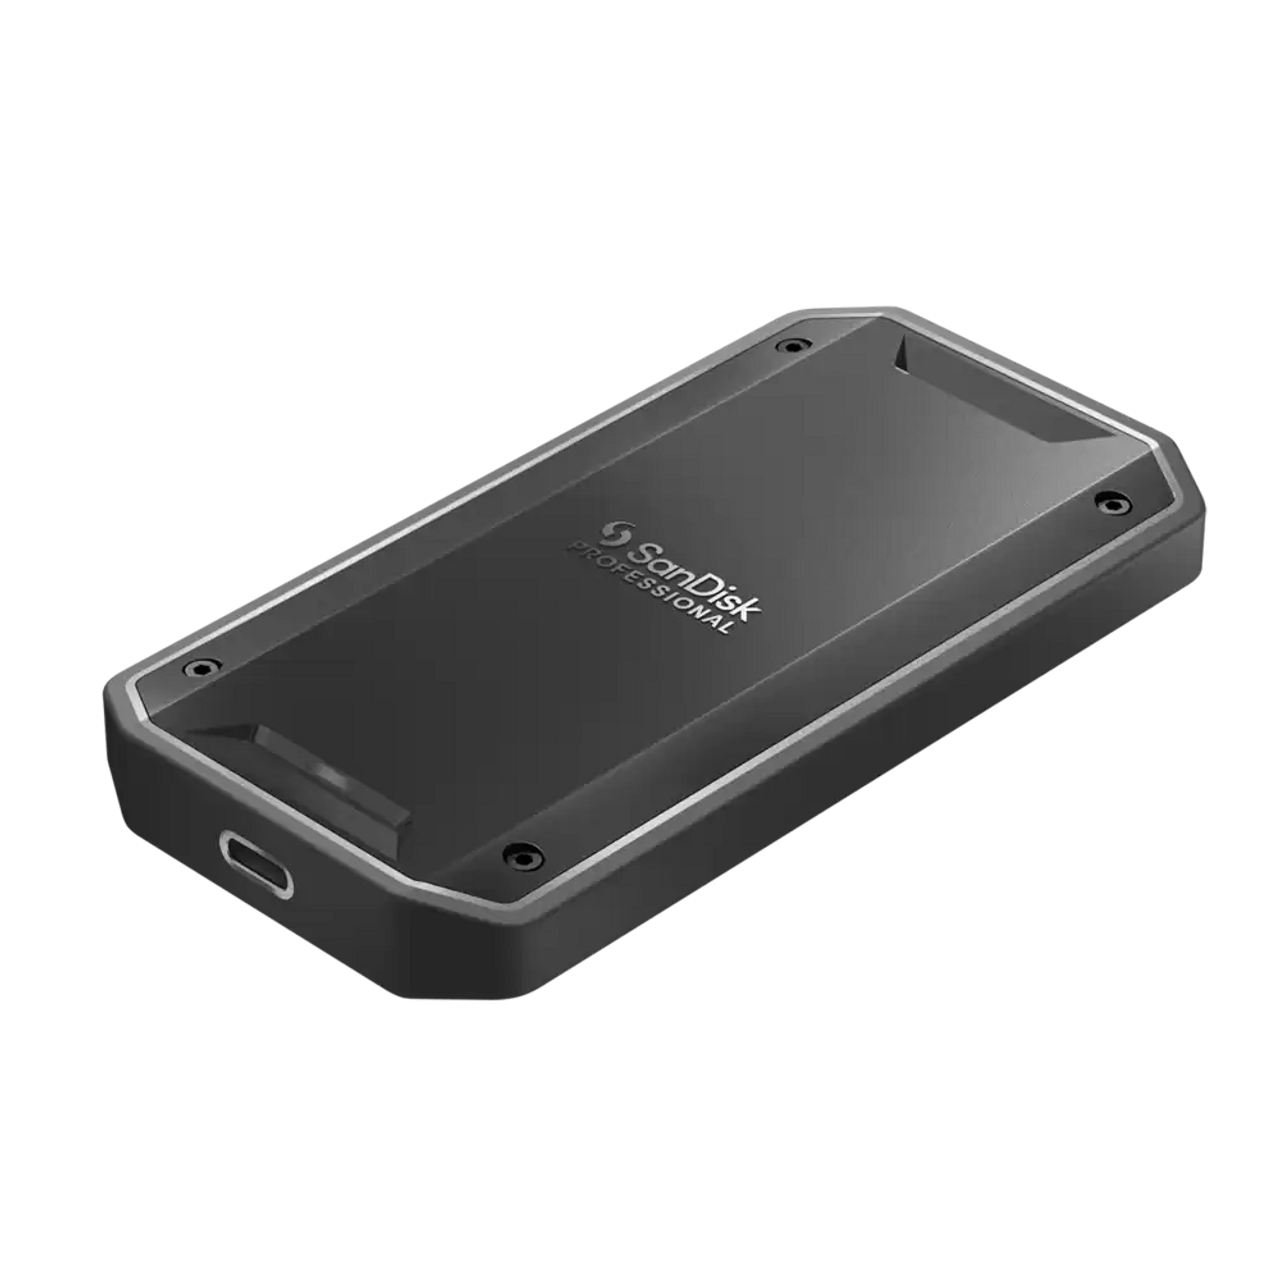 5419837 - SANDISK Extreme Portable External SSD - 500 GB, Black - Currys  Business